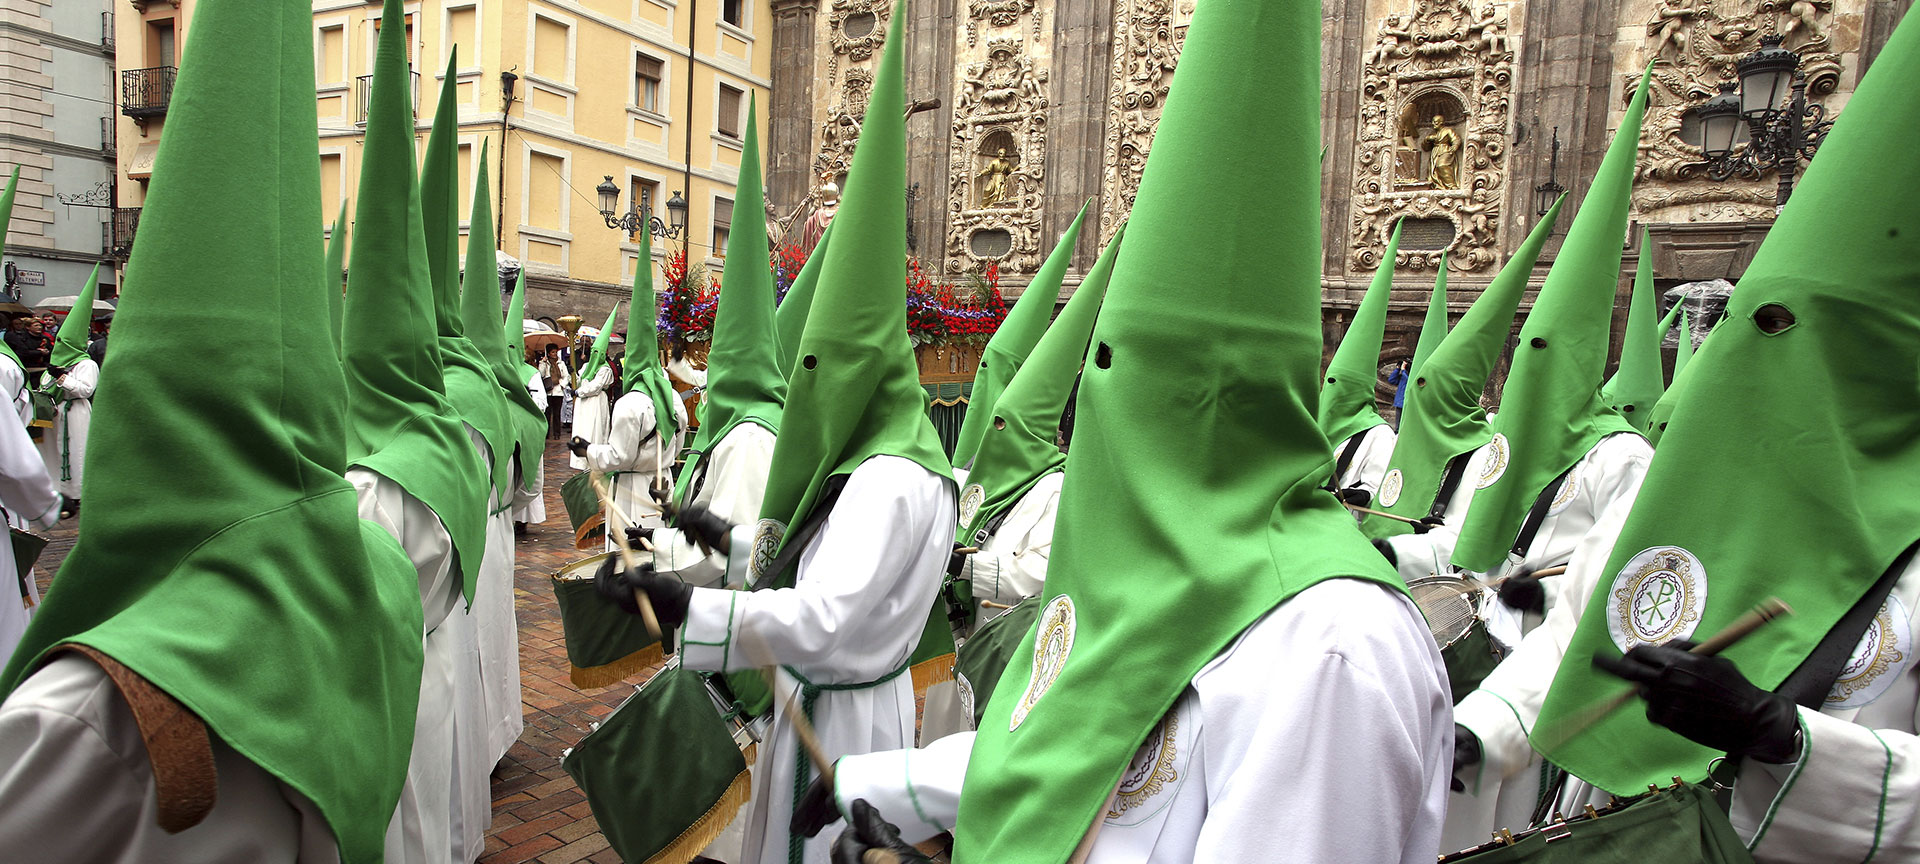 Lay Brothers and Church of Santa Isabel during Easter Week in Zaragoza